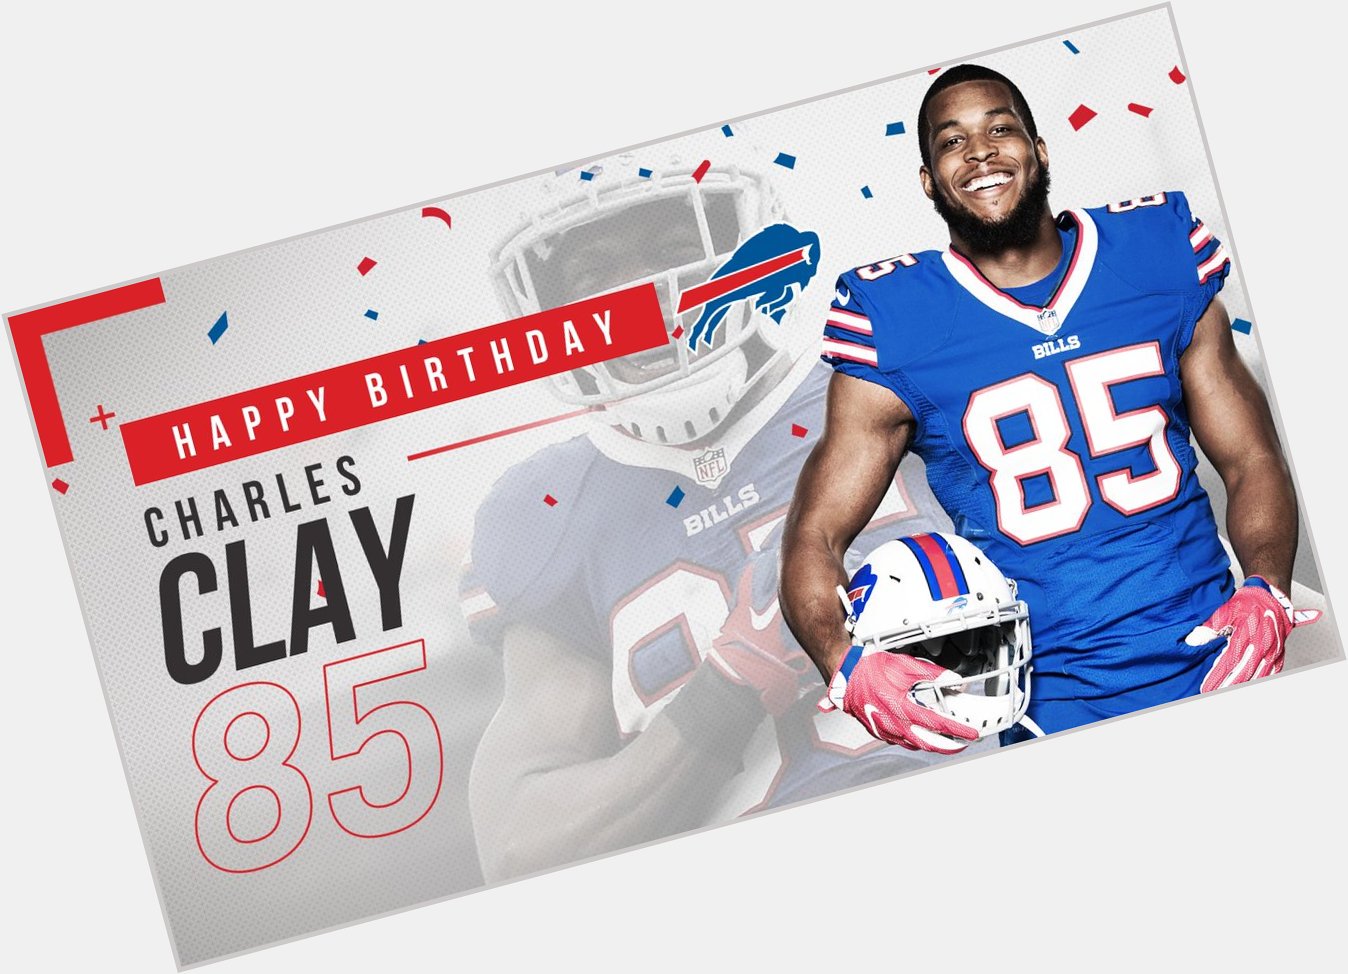 Happy birthday Charles Clay!

Help us wish a great day to  